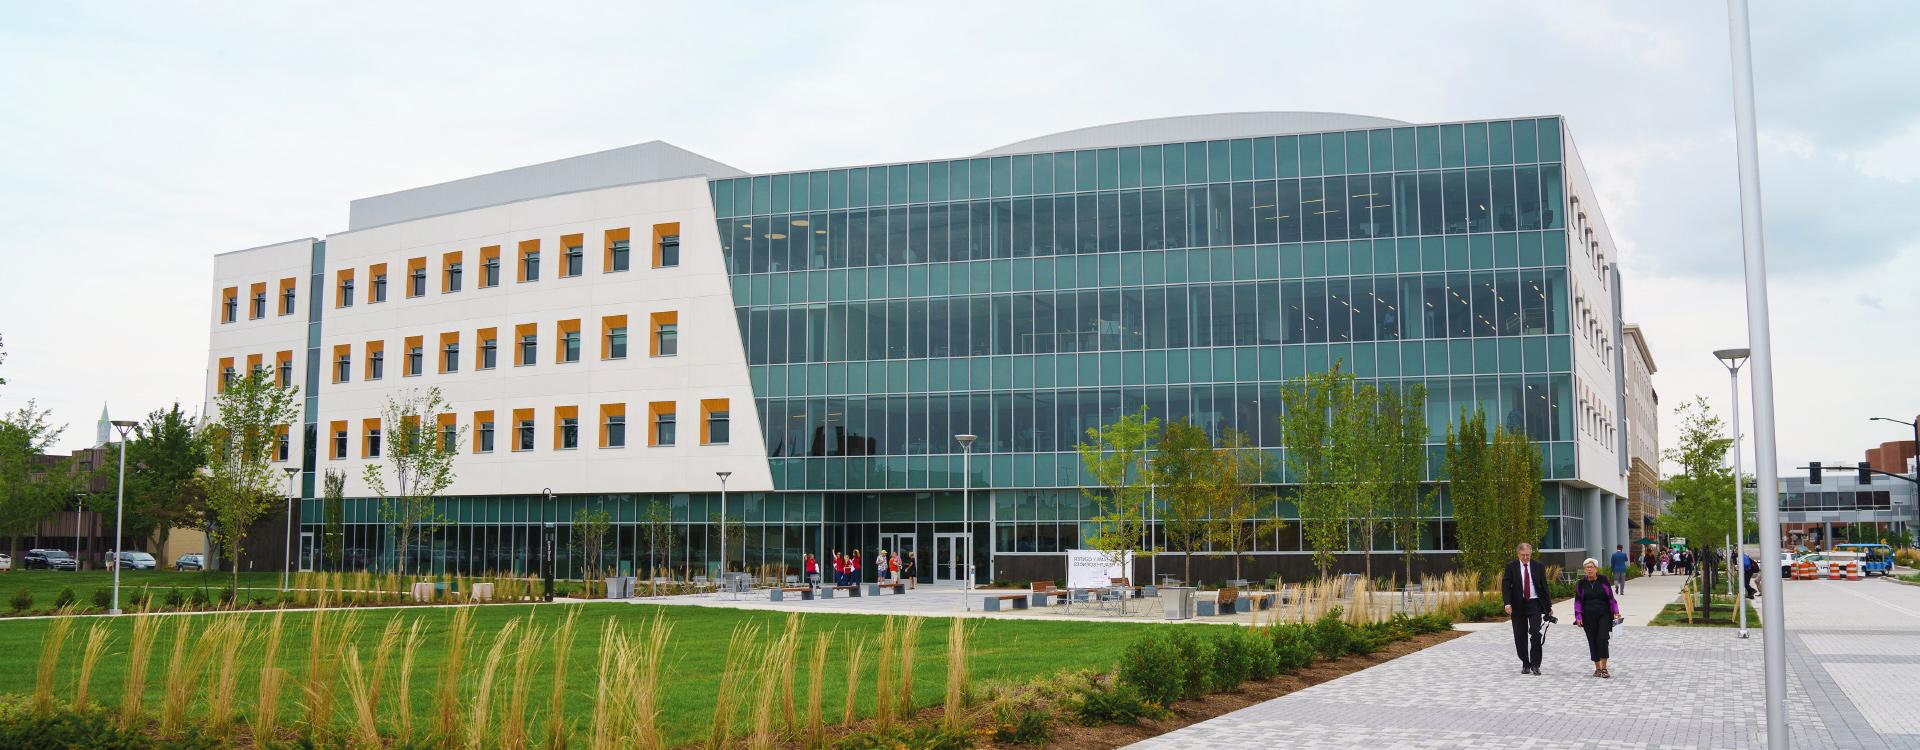 Stone Family Center for Health Sciences